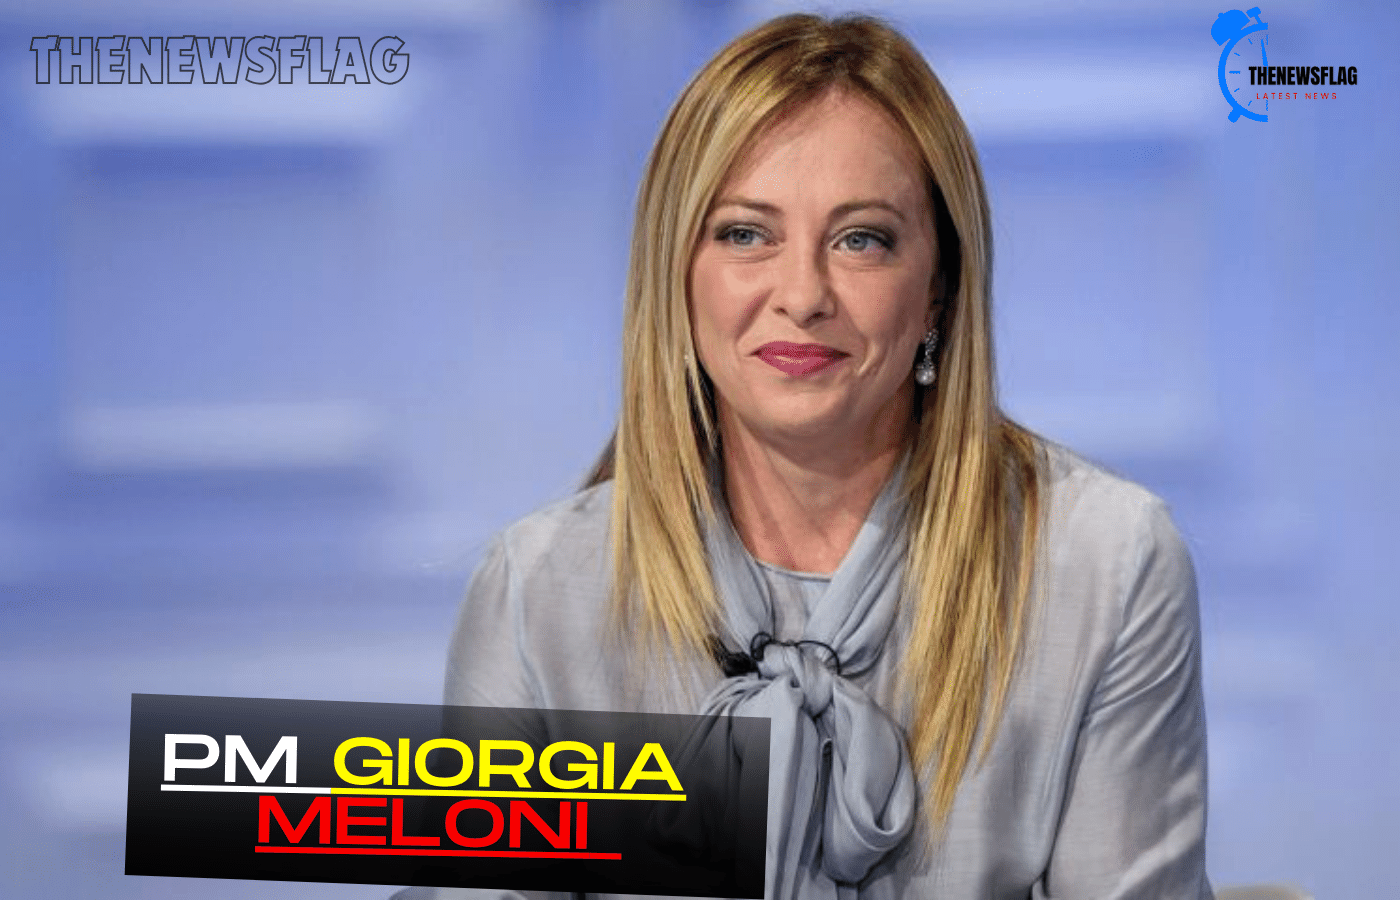 PM of Italy Giorgia Meloni Demands Damages of More Than $100,000 over Deepfake Videos